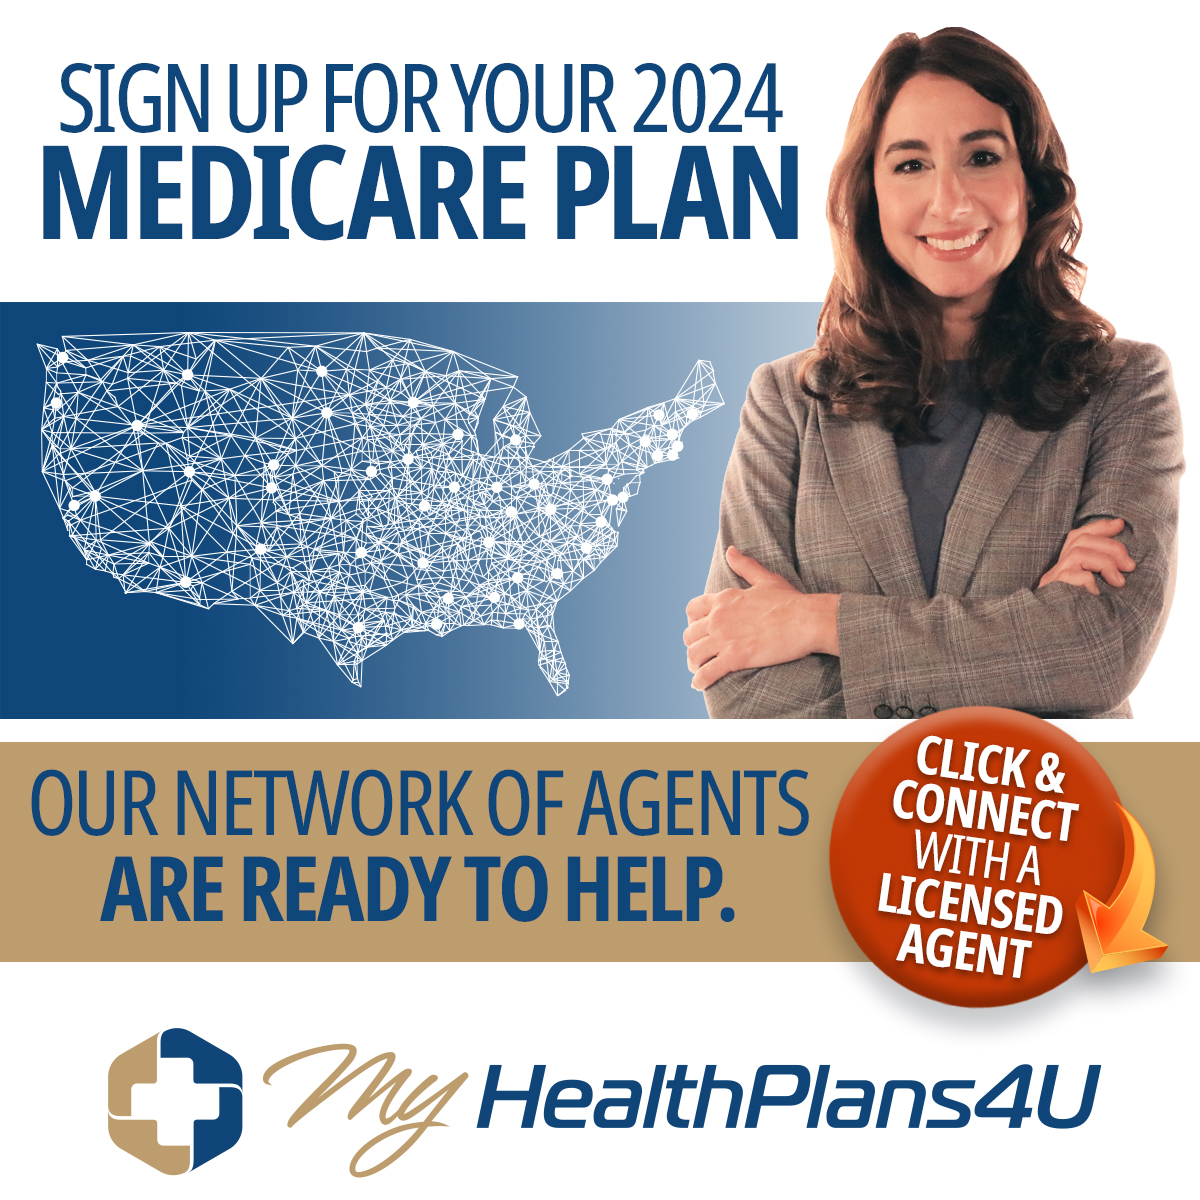 Sign up for your 2023 Medicare Plan - our network of agents is ready to help. Click to connect with a licensed agent!